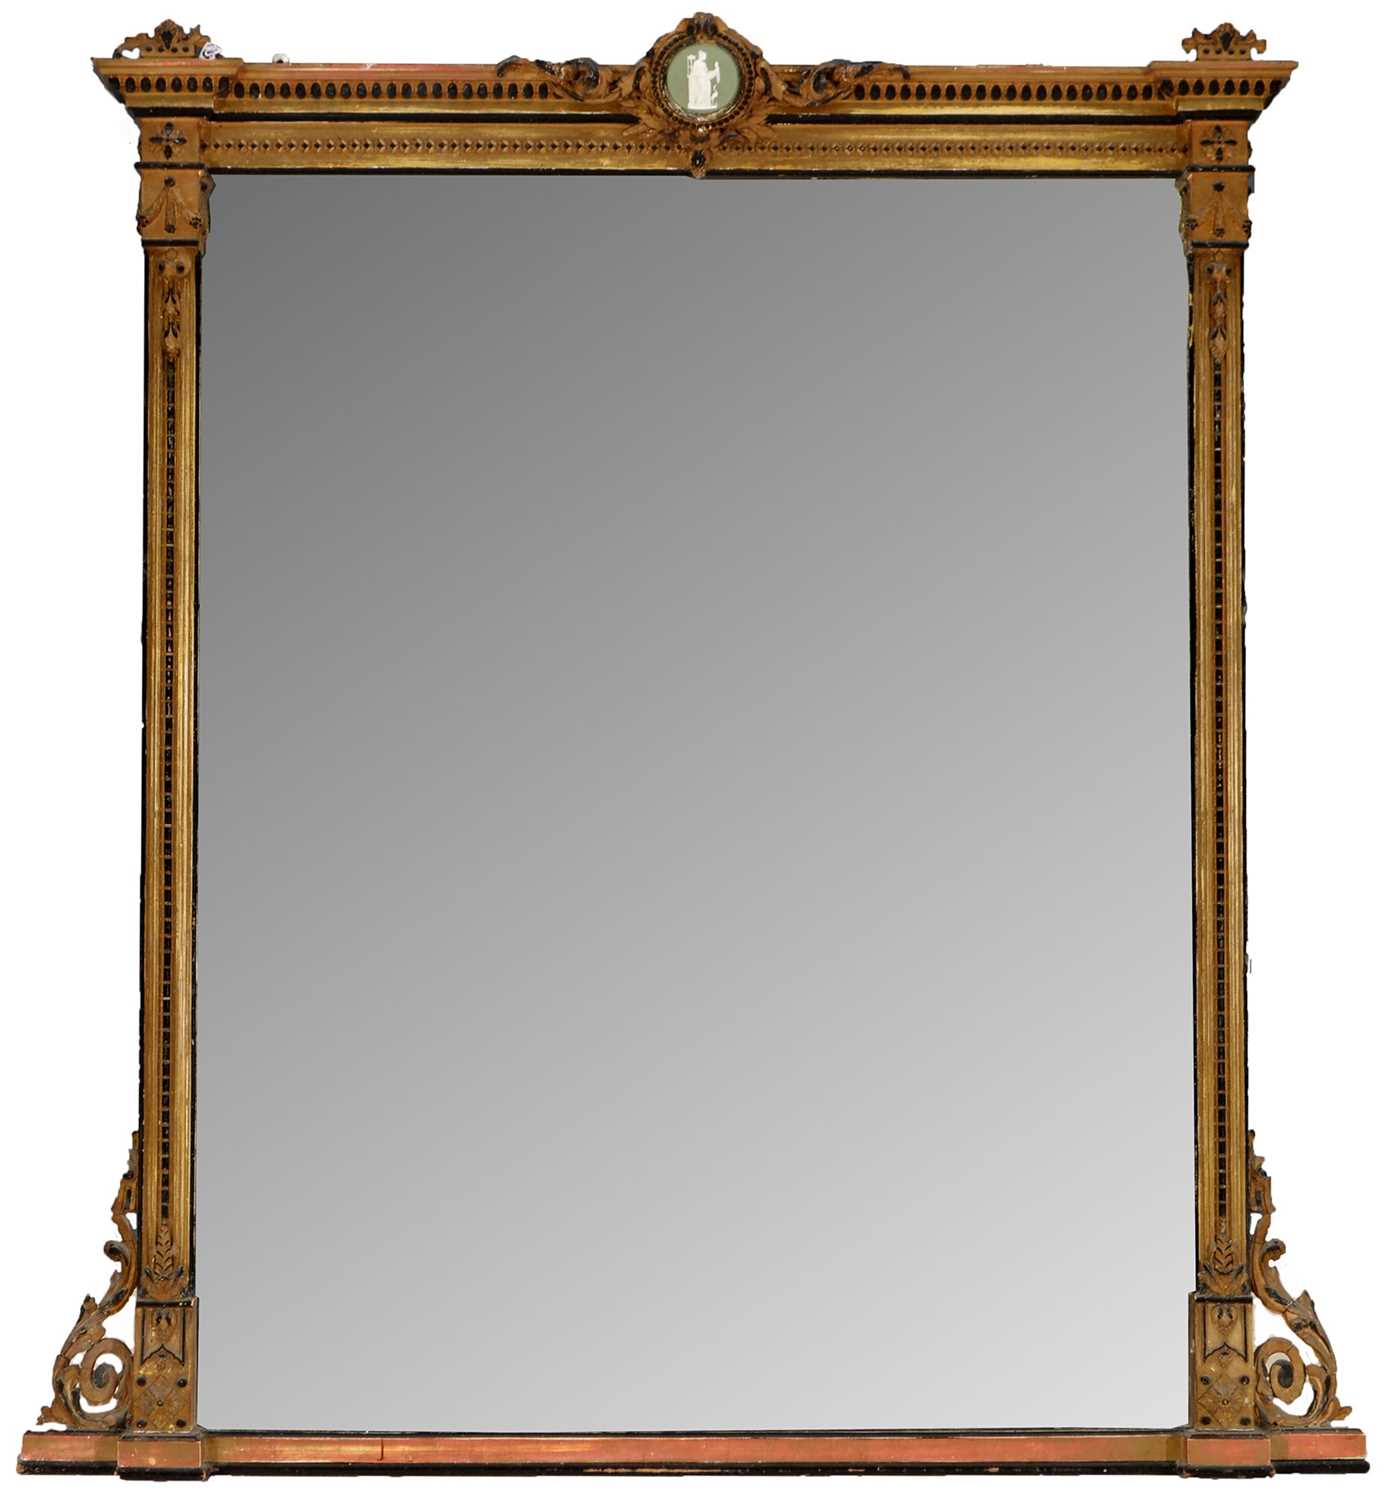 Lot 816 - late 19th century parcel gilt and gesso overmantel mirror